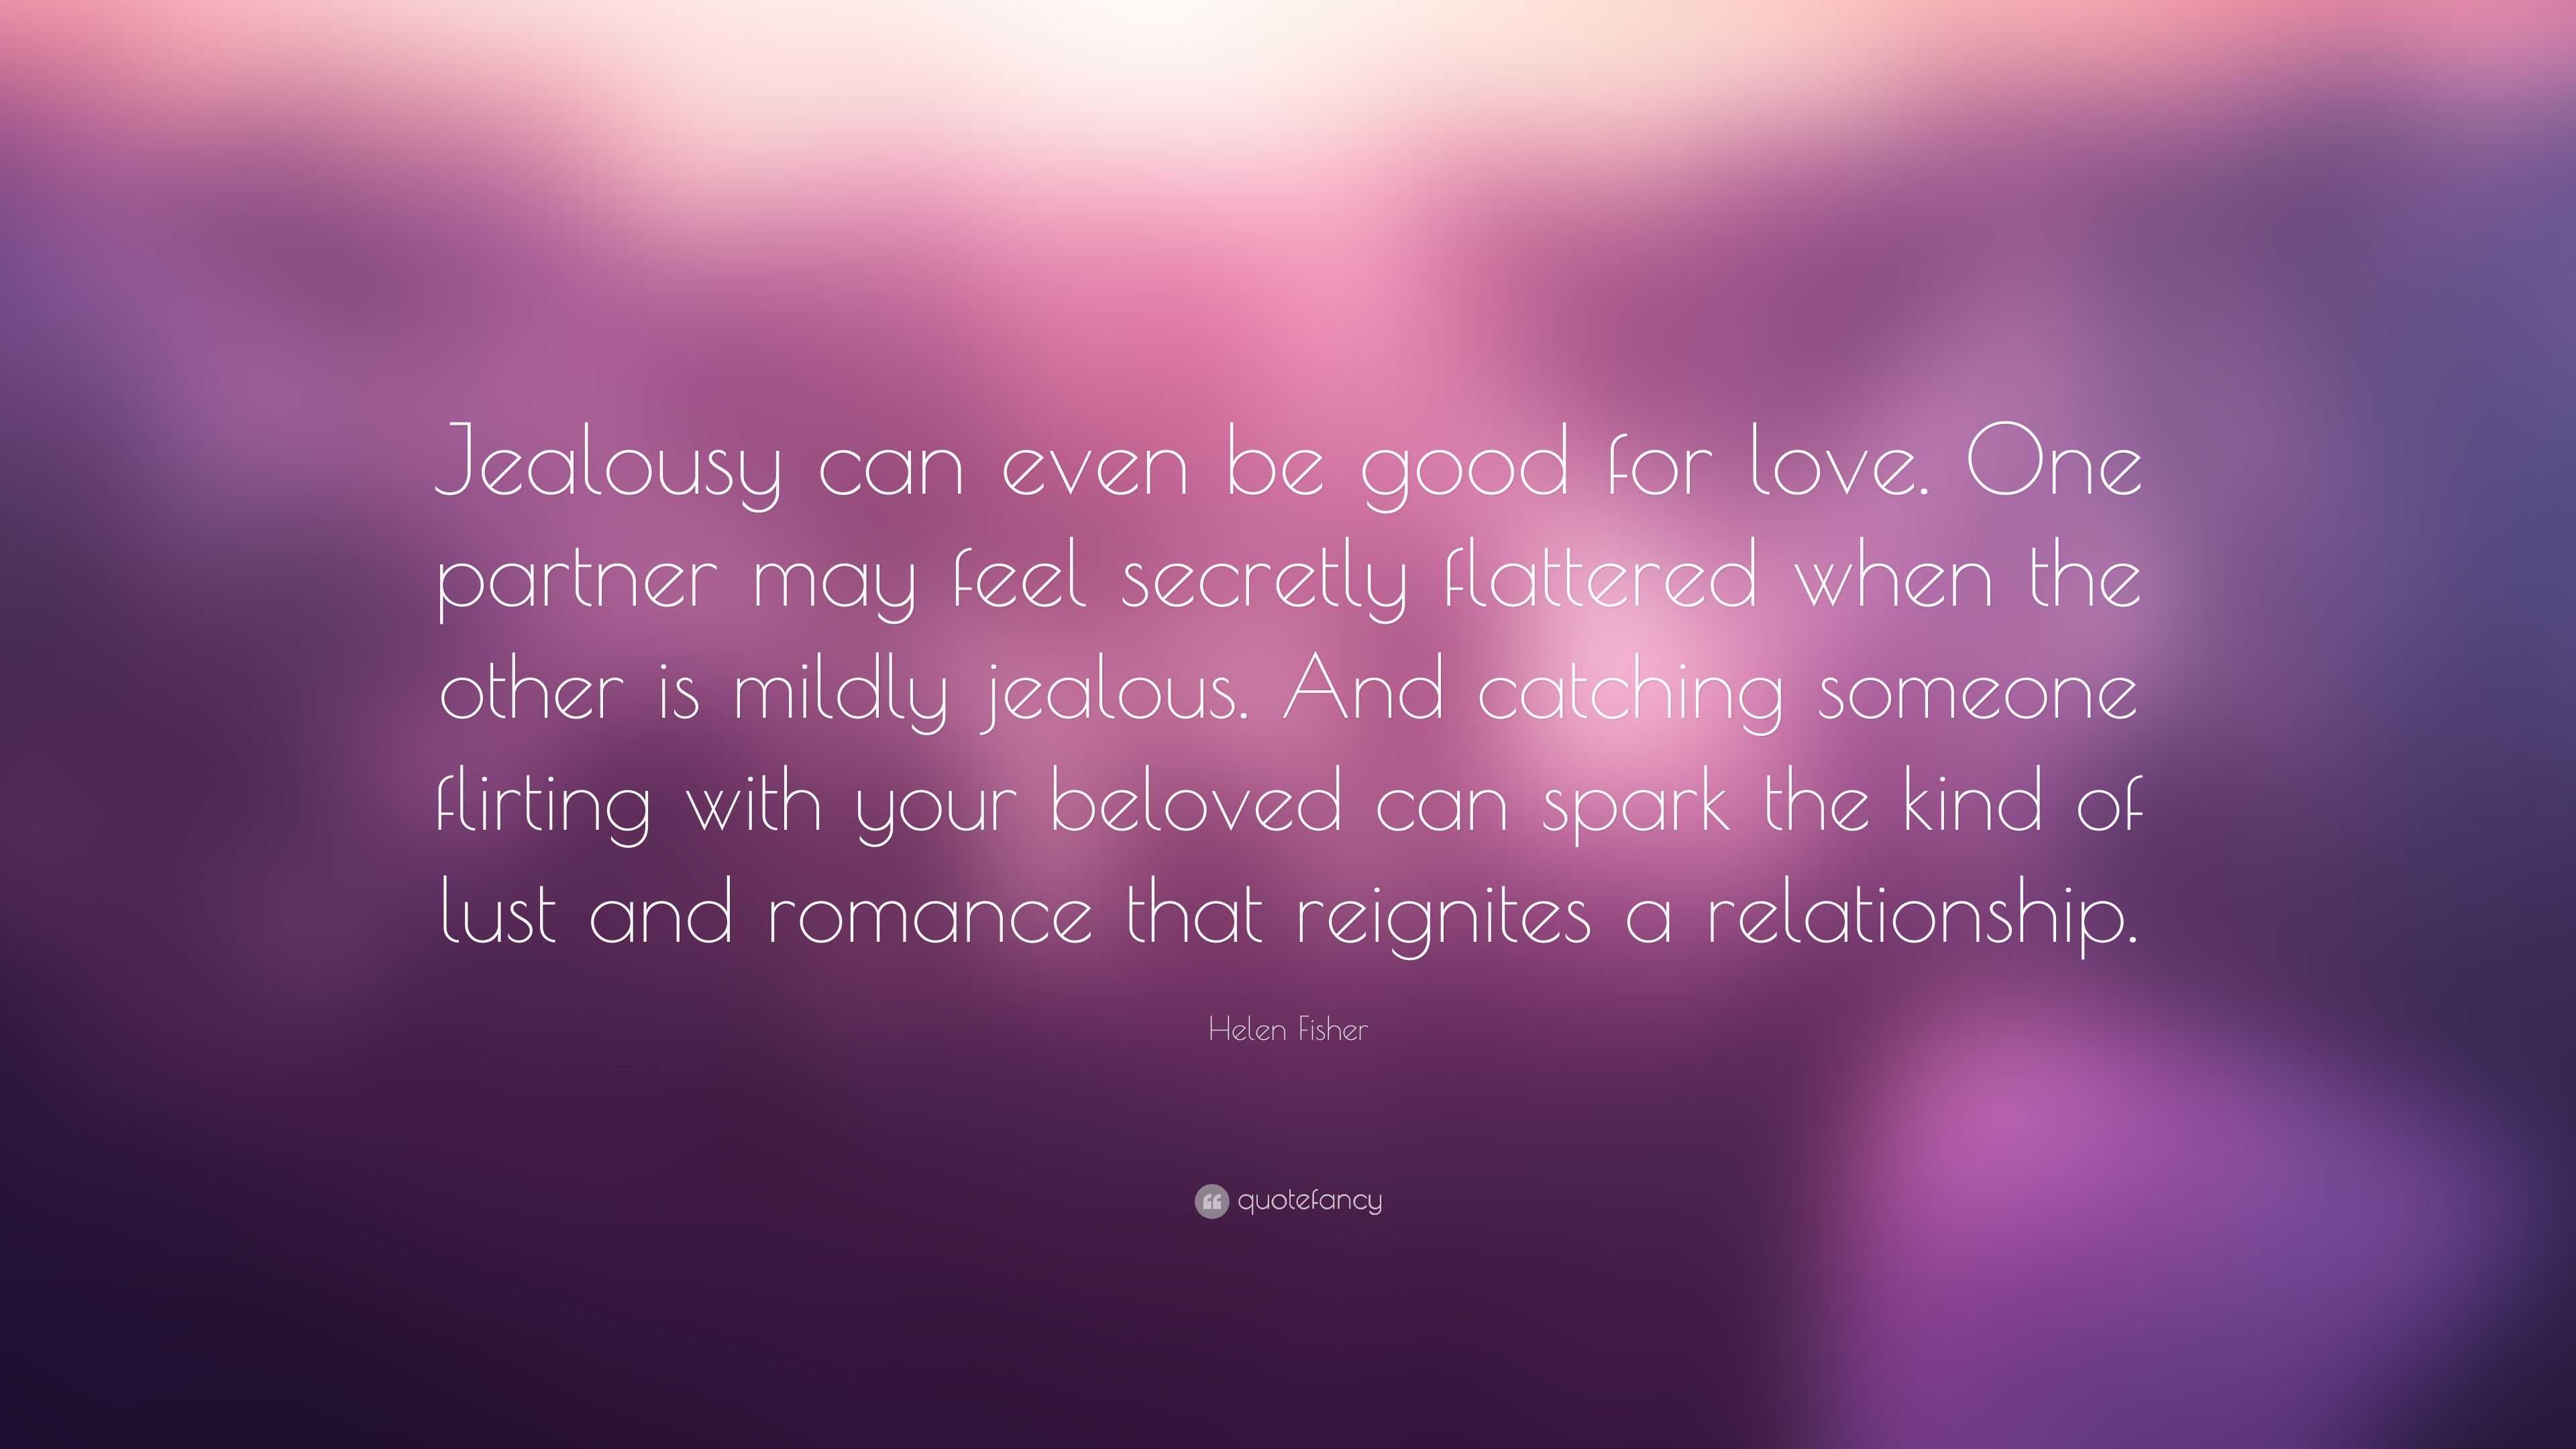 Helen Fisher Quote: “Jealousy can even be good for love. One partner ...